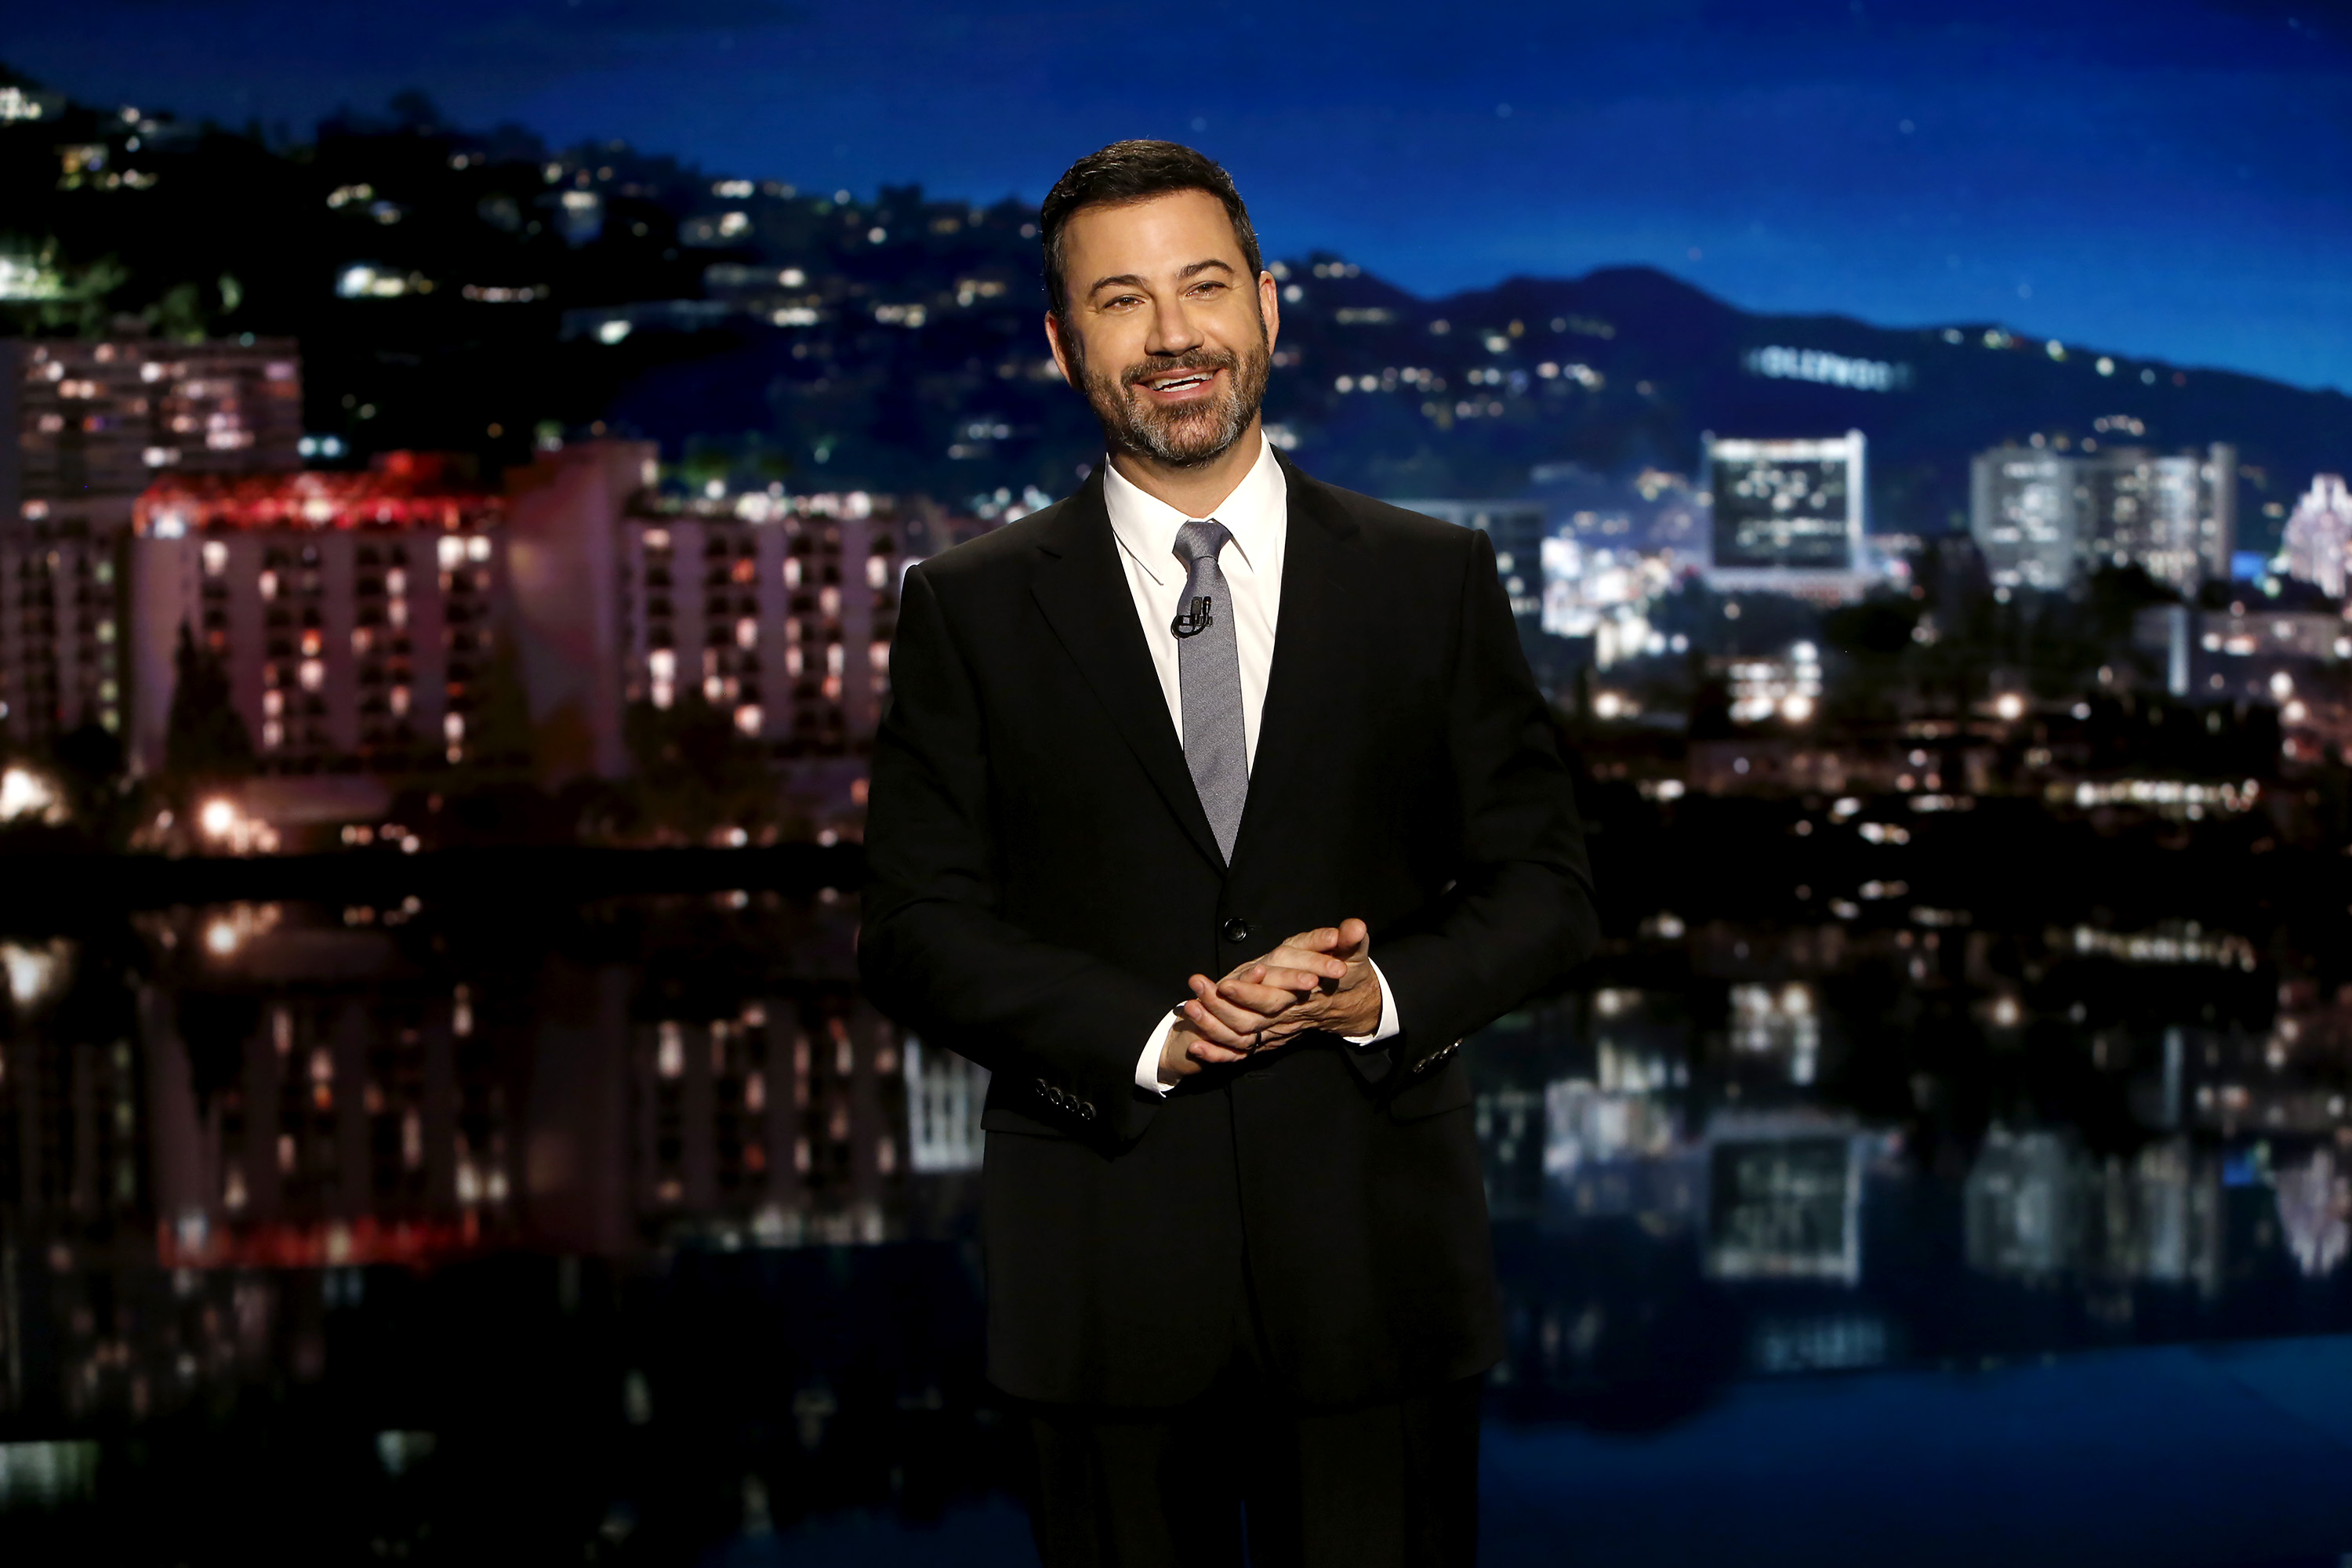 Still from Jimmy Kimmel Live, which airs every weeknight at 11:35 p.m. EST. (Randy Holmes—ABC via Getty Images)